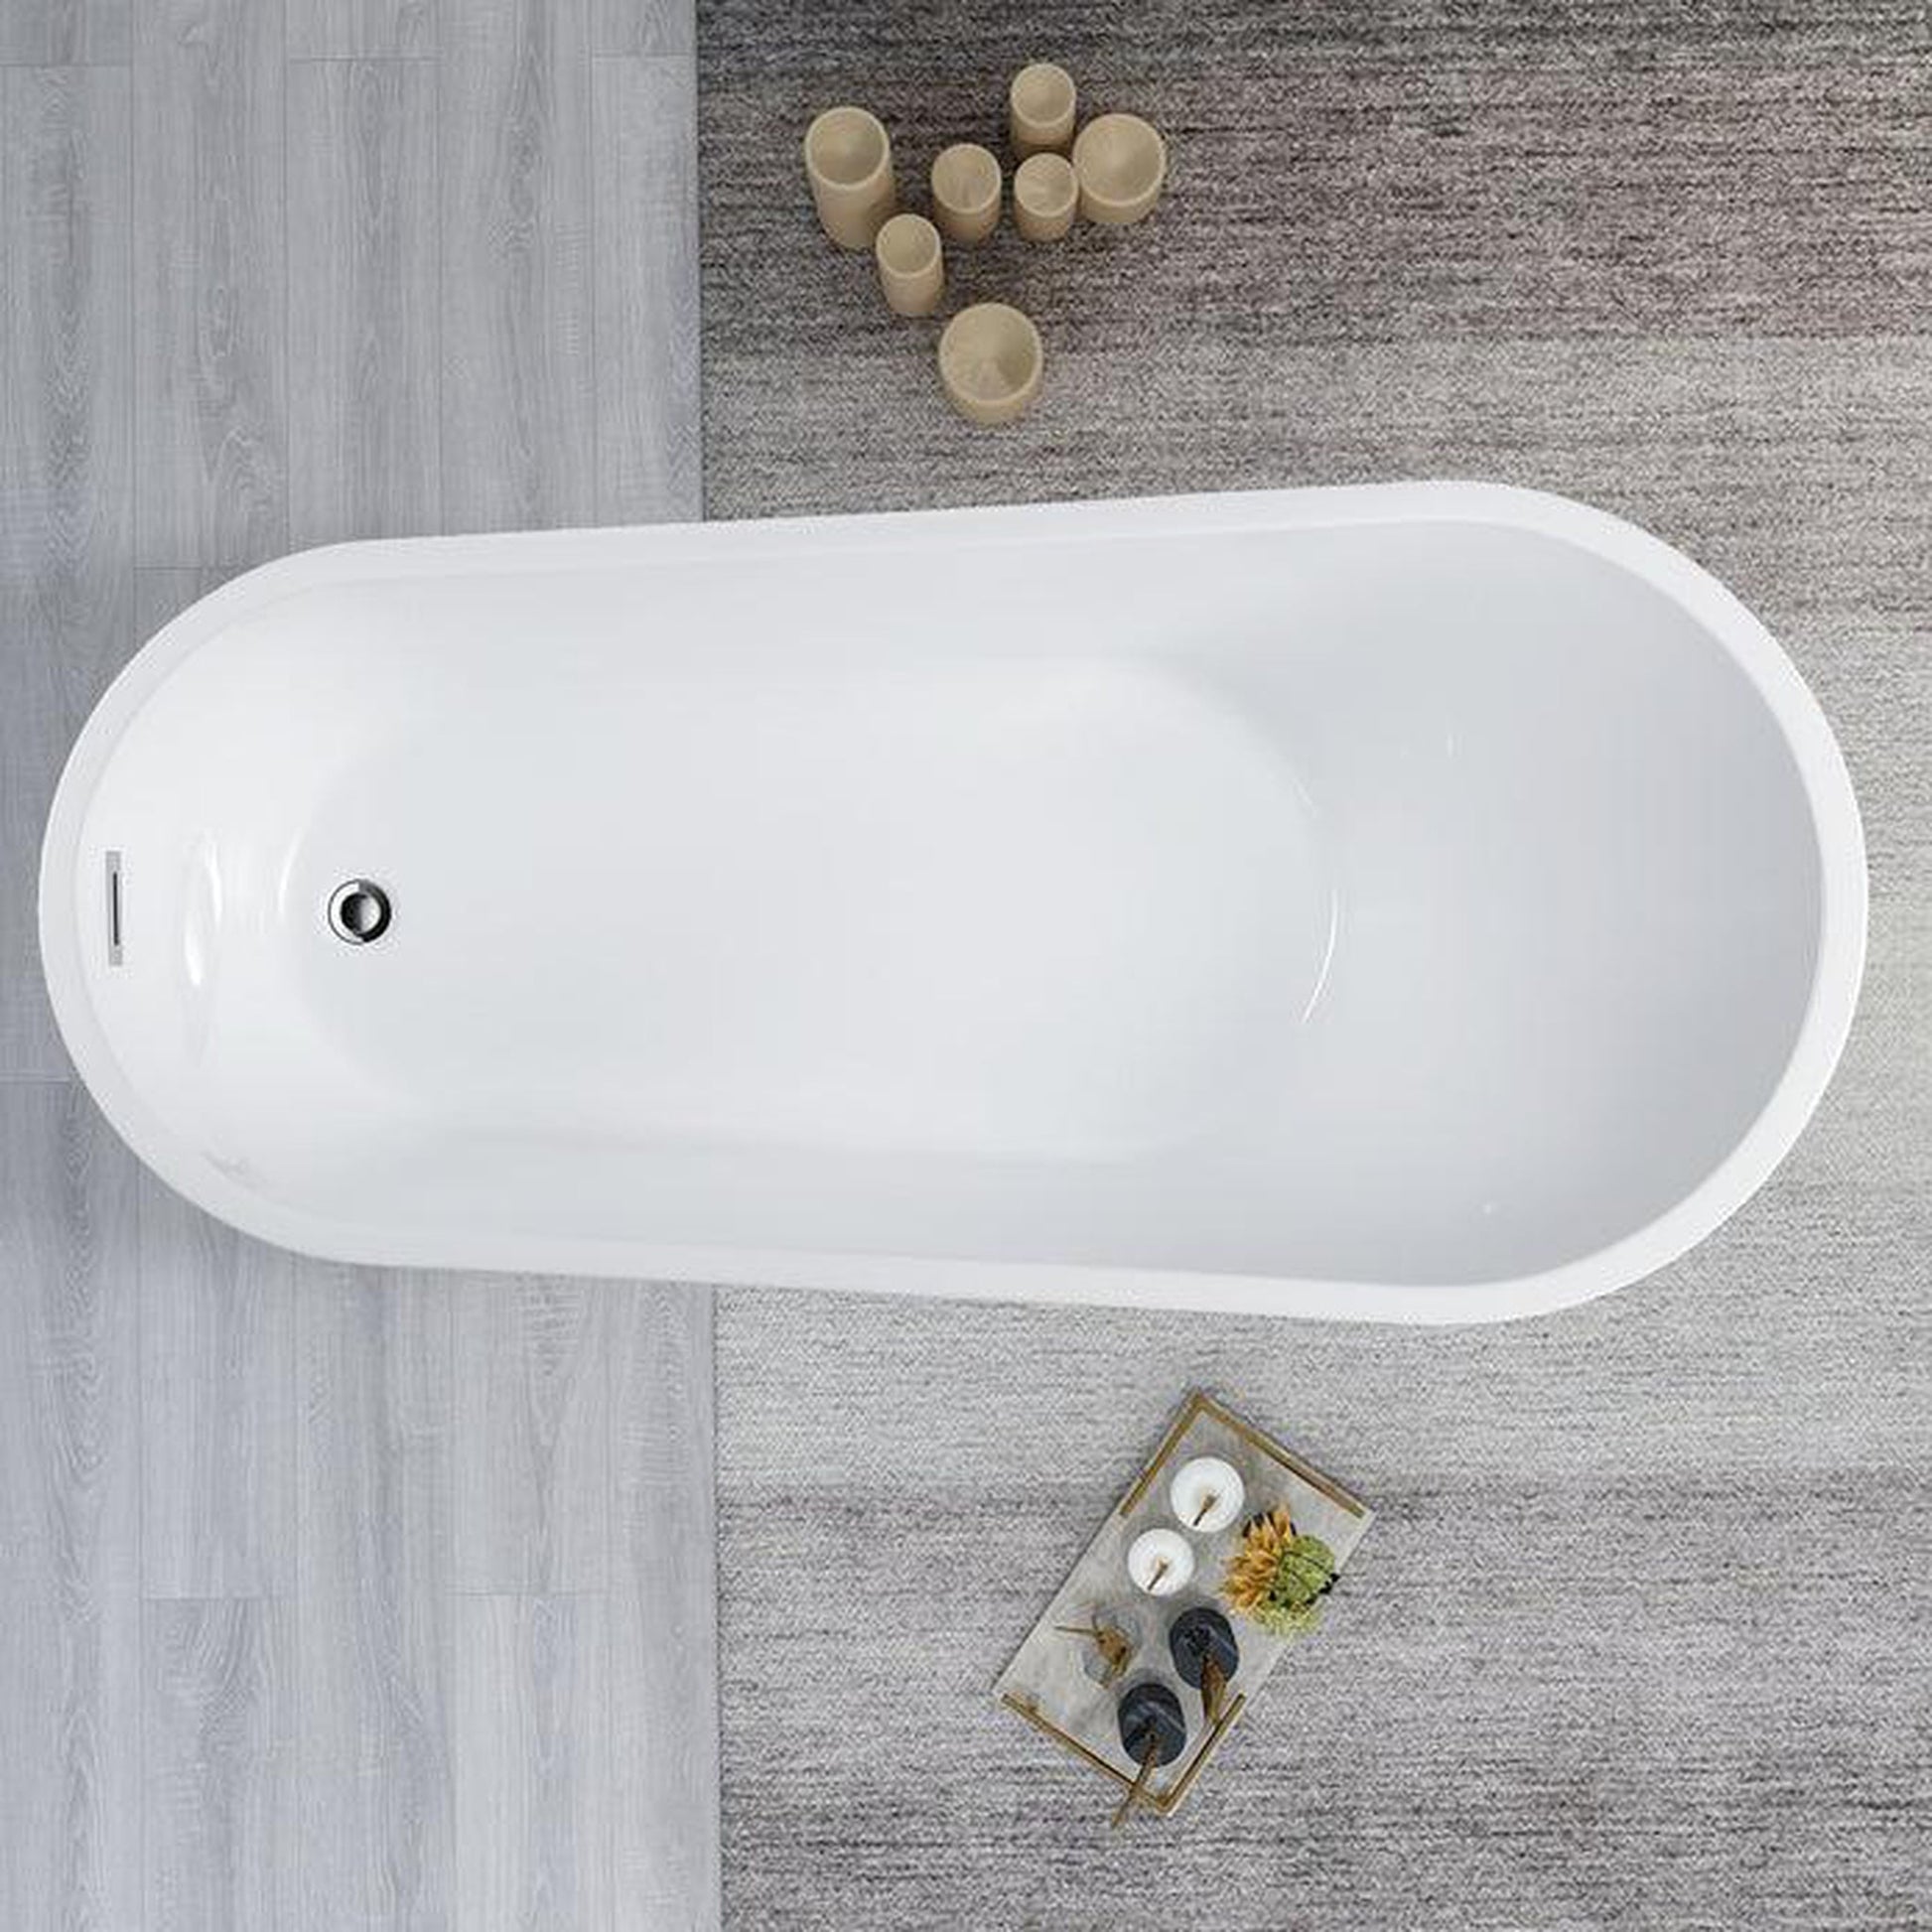 Vanity Art 67" White Acrylic Freestanding Bathtub With Polished Chrome Pop-up Drain, Slotted Overflow and Flexible Drain Hose